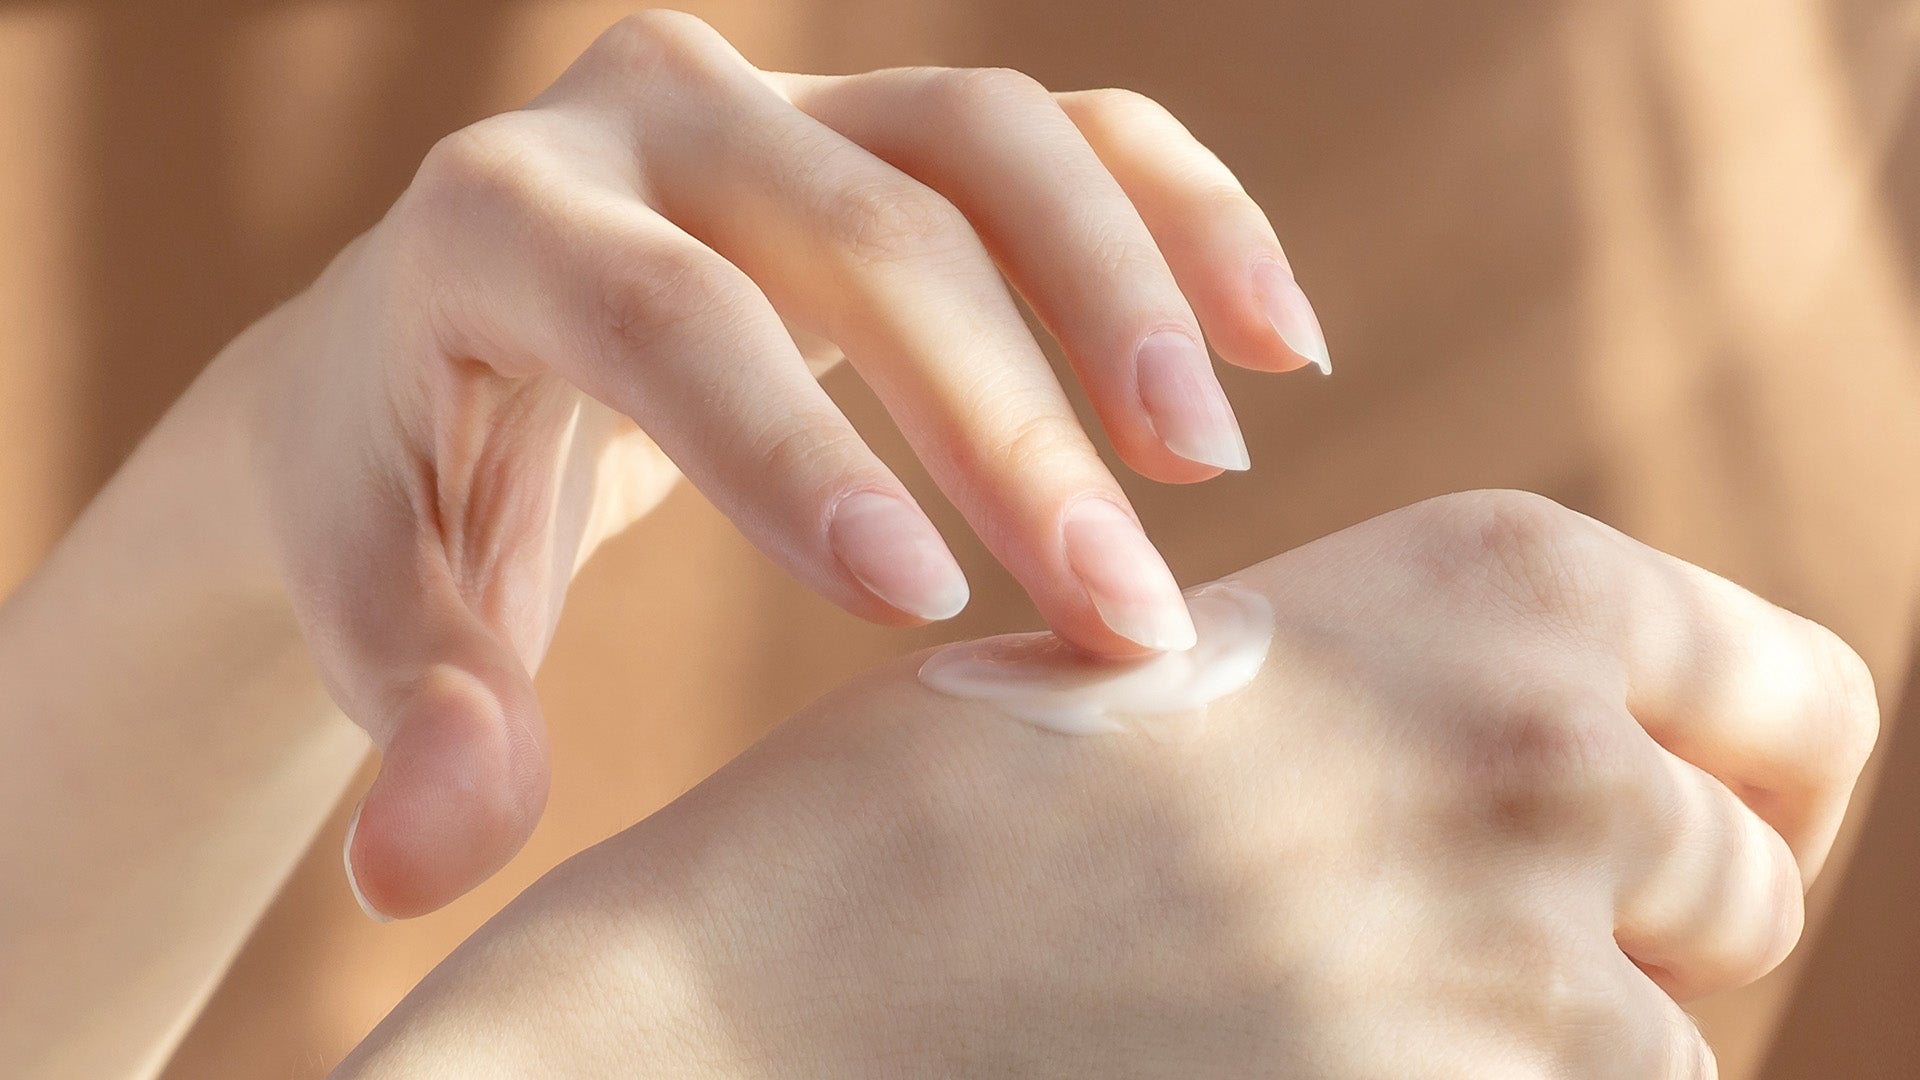 DISCOVER YOUR COMPLETE HAND CARE RITUAL